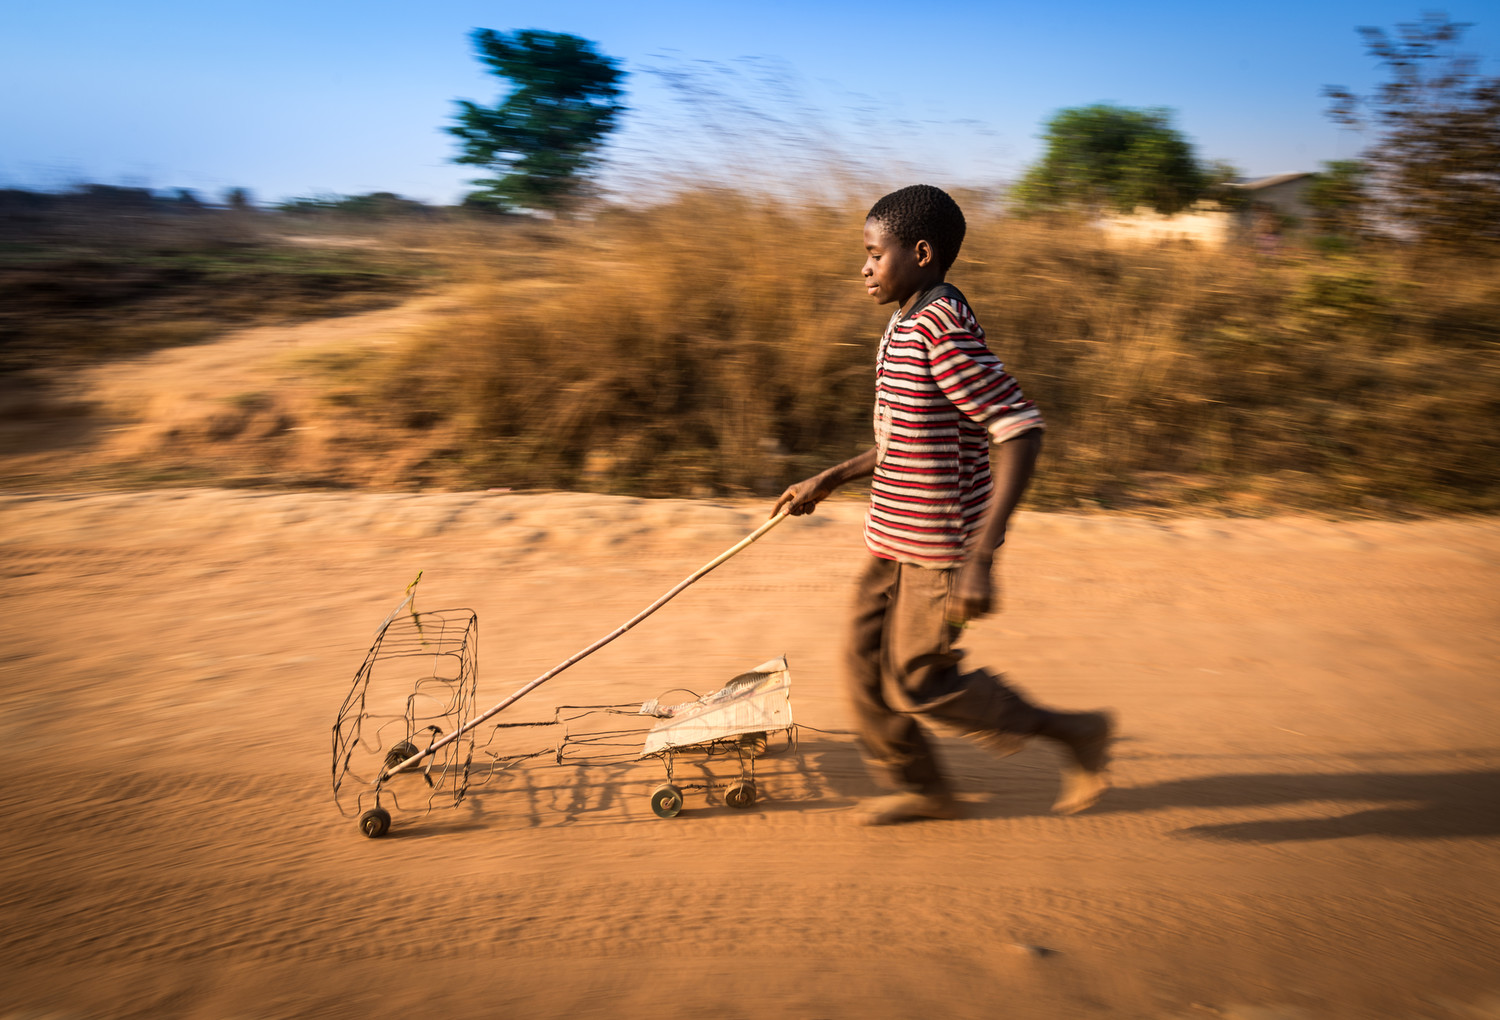 Felix Kansapato, 13, pushes a toy truck made out of wire and cardboard down a road in Kapululwe, Zambia. Felix created something from nothing, using only the materials available: scrap pieces of wire, cardboard, and old wooden wheels. ©2015 Eugene Lee/World Vision